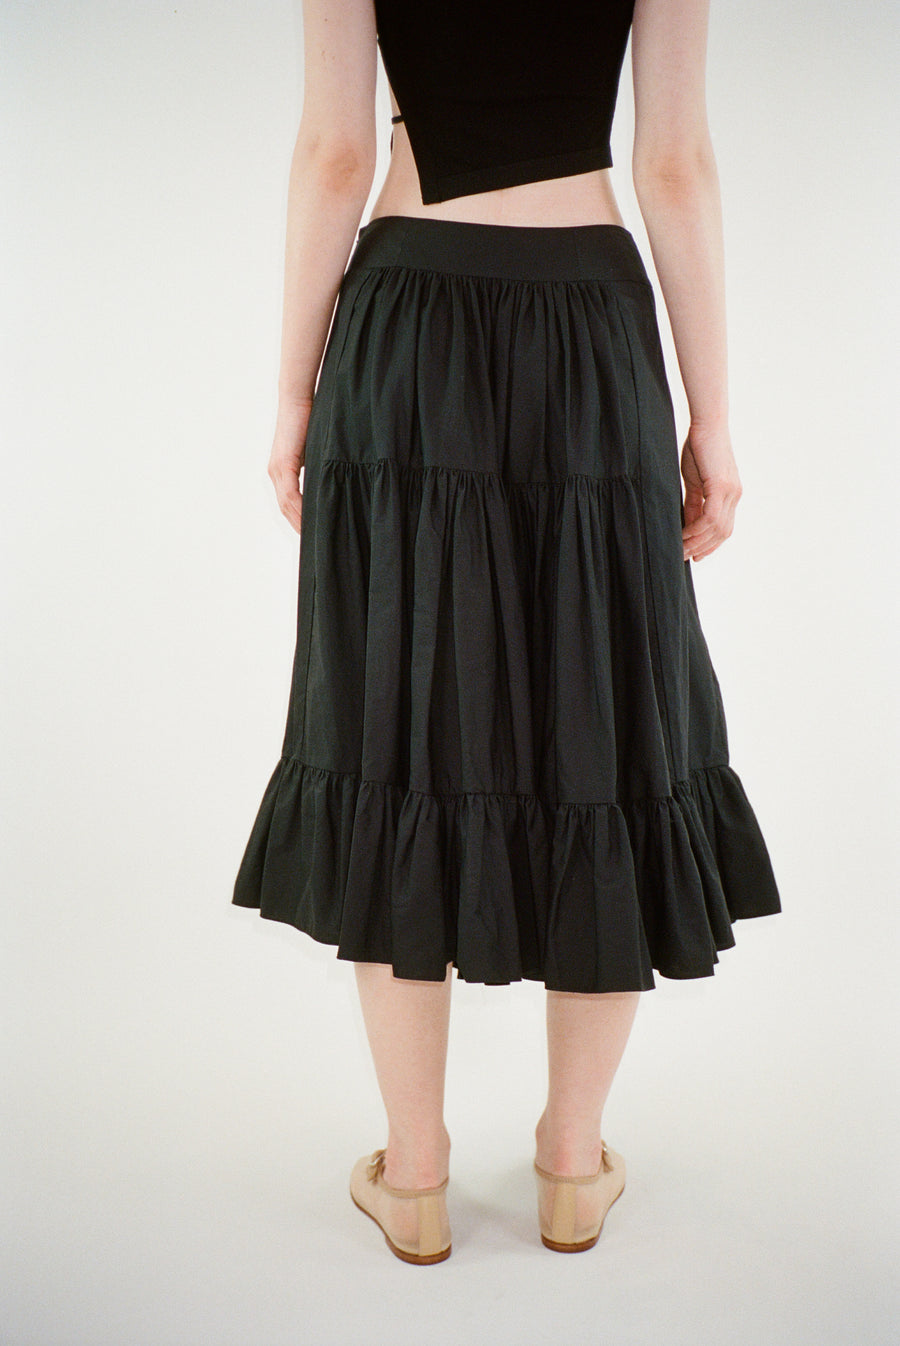 Midi length skirt in black with tiered construction on model